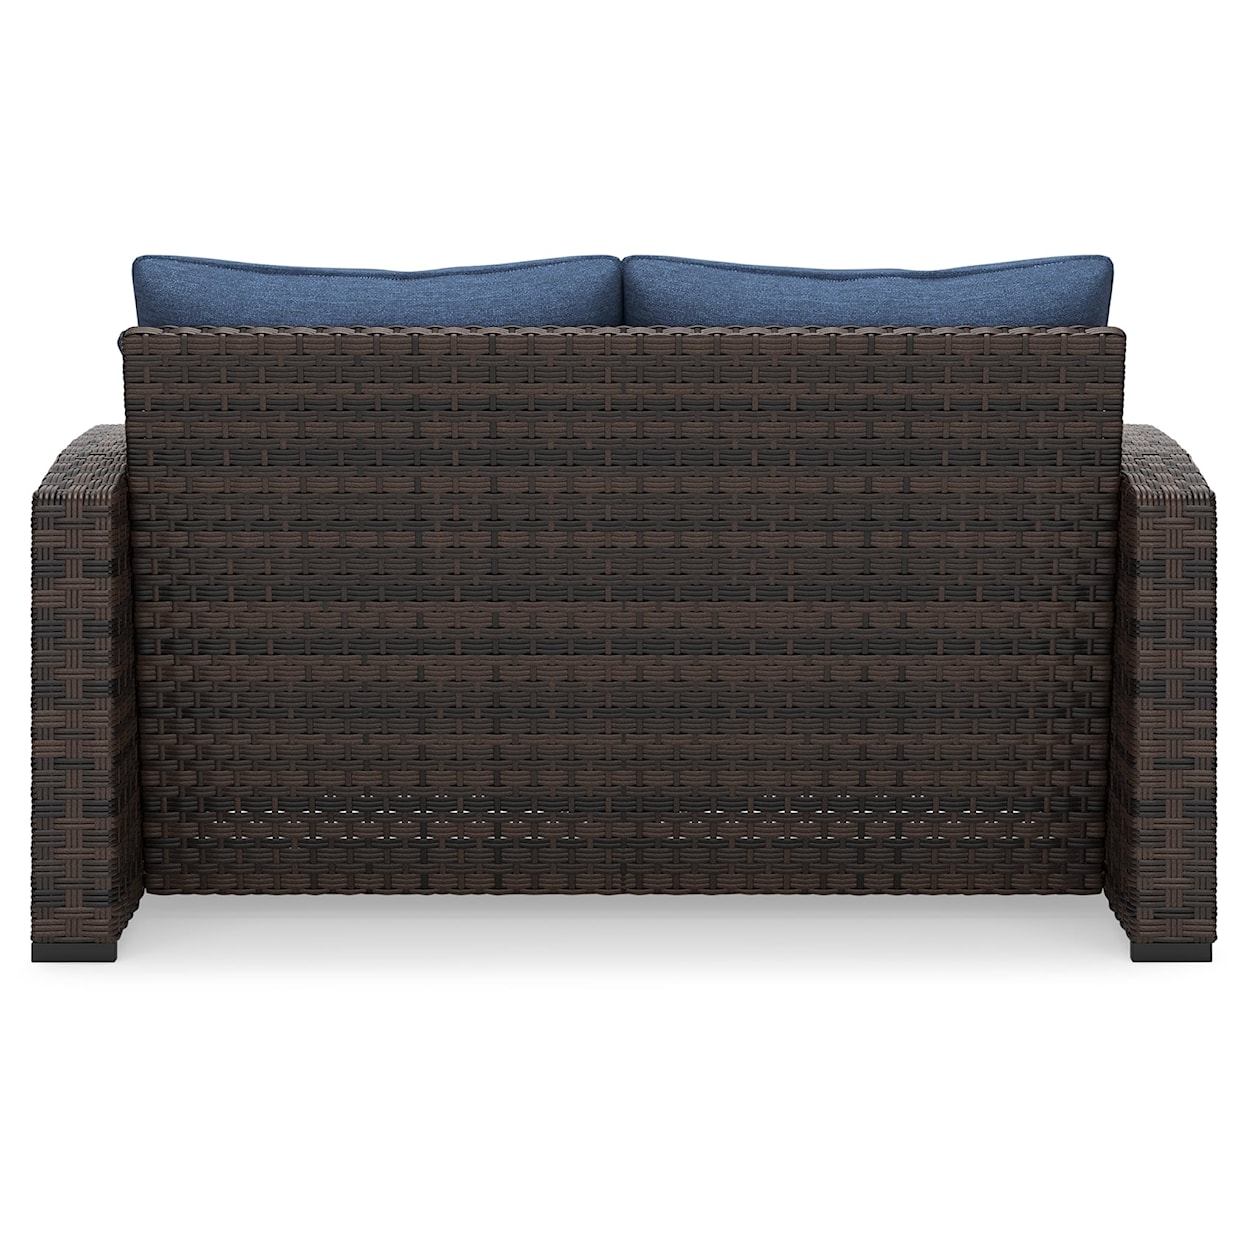 Michael Alan Select Windglow Outdoor Loveseat with Cushion